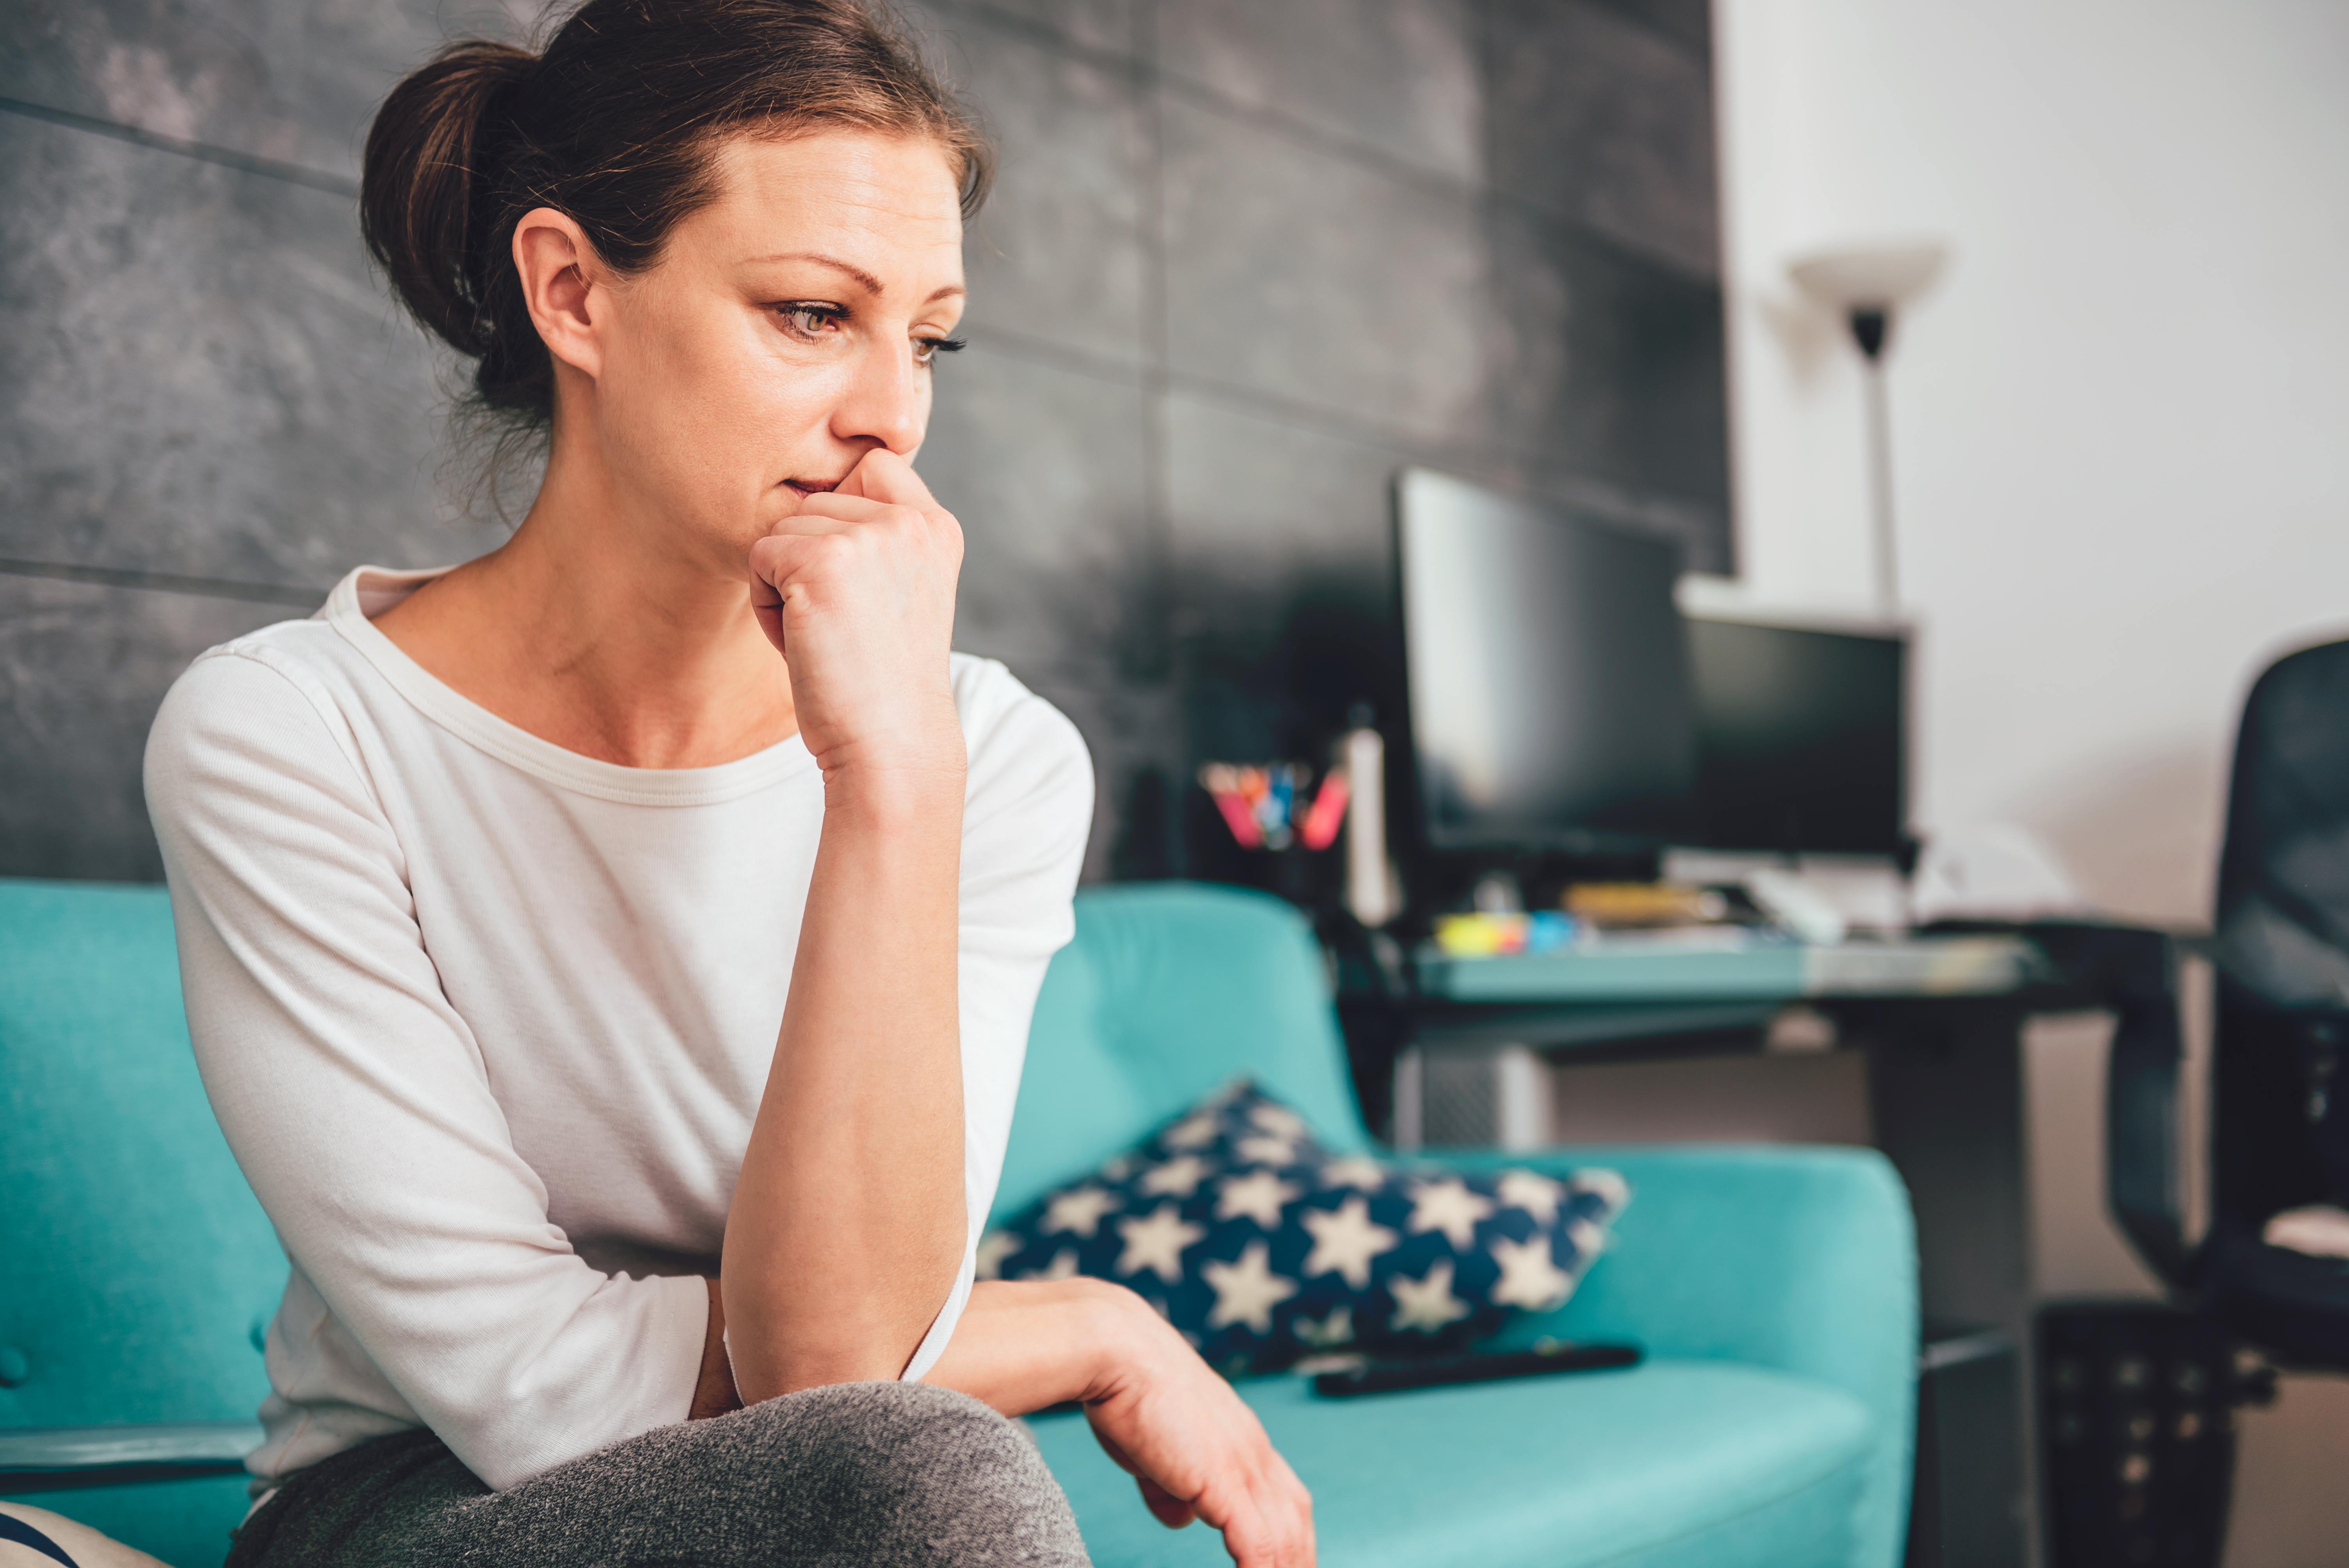 An upset woman sitting on the sofa | Source: Shutterstock